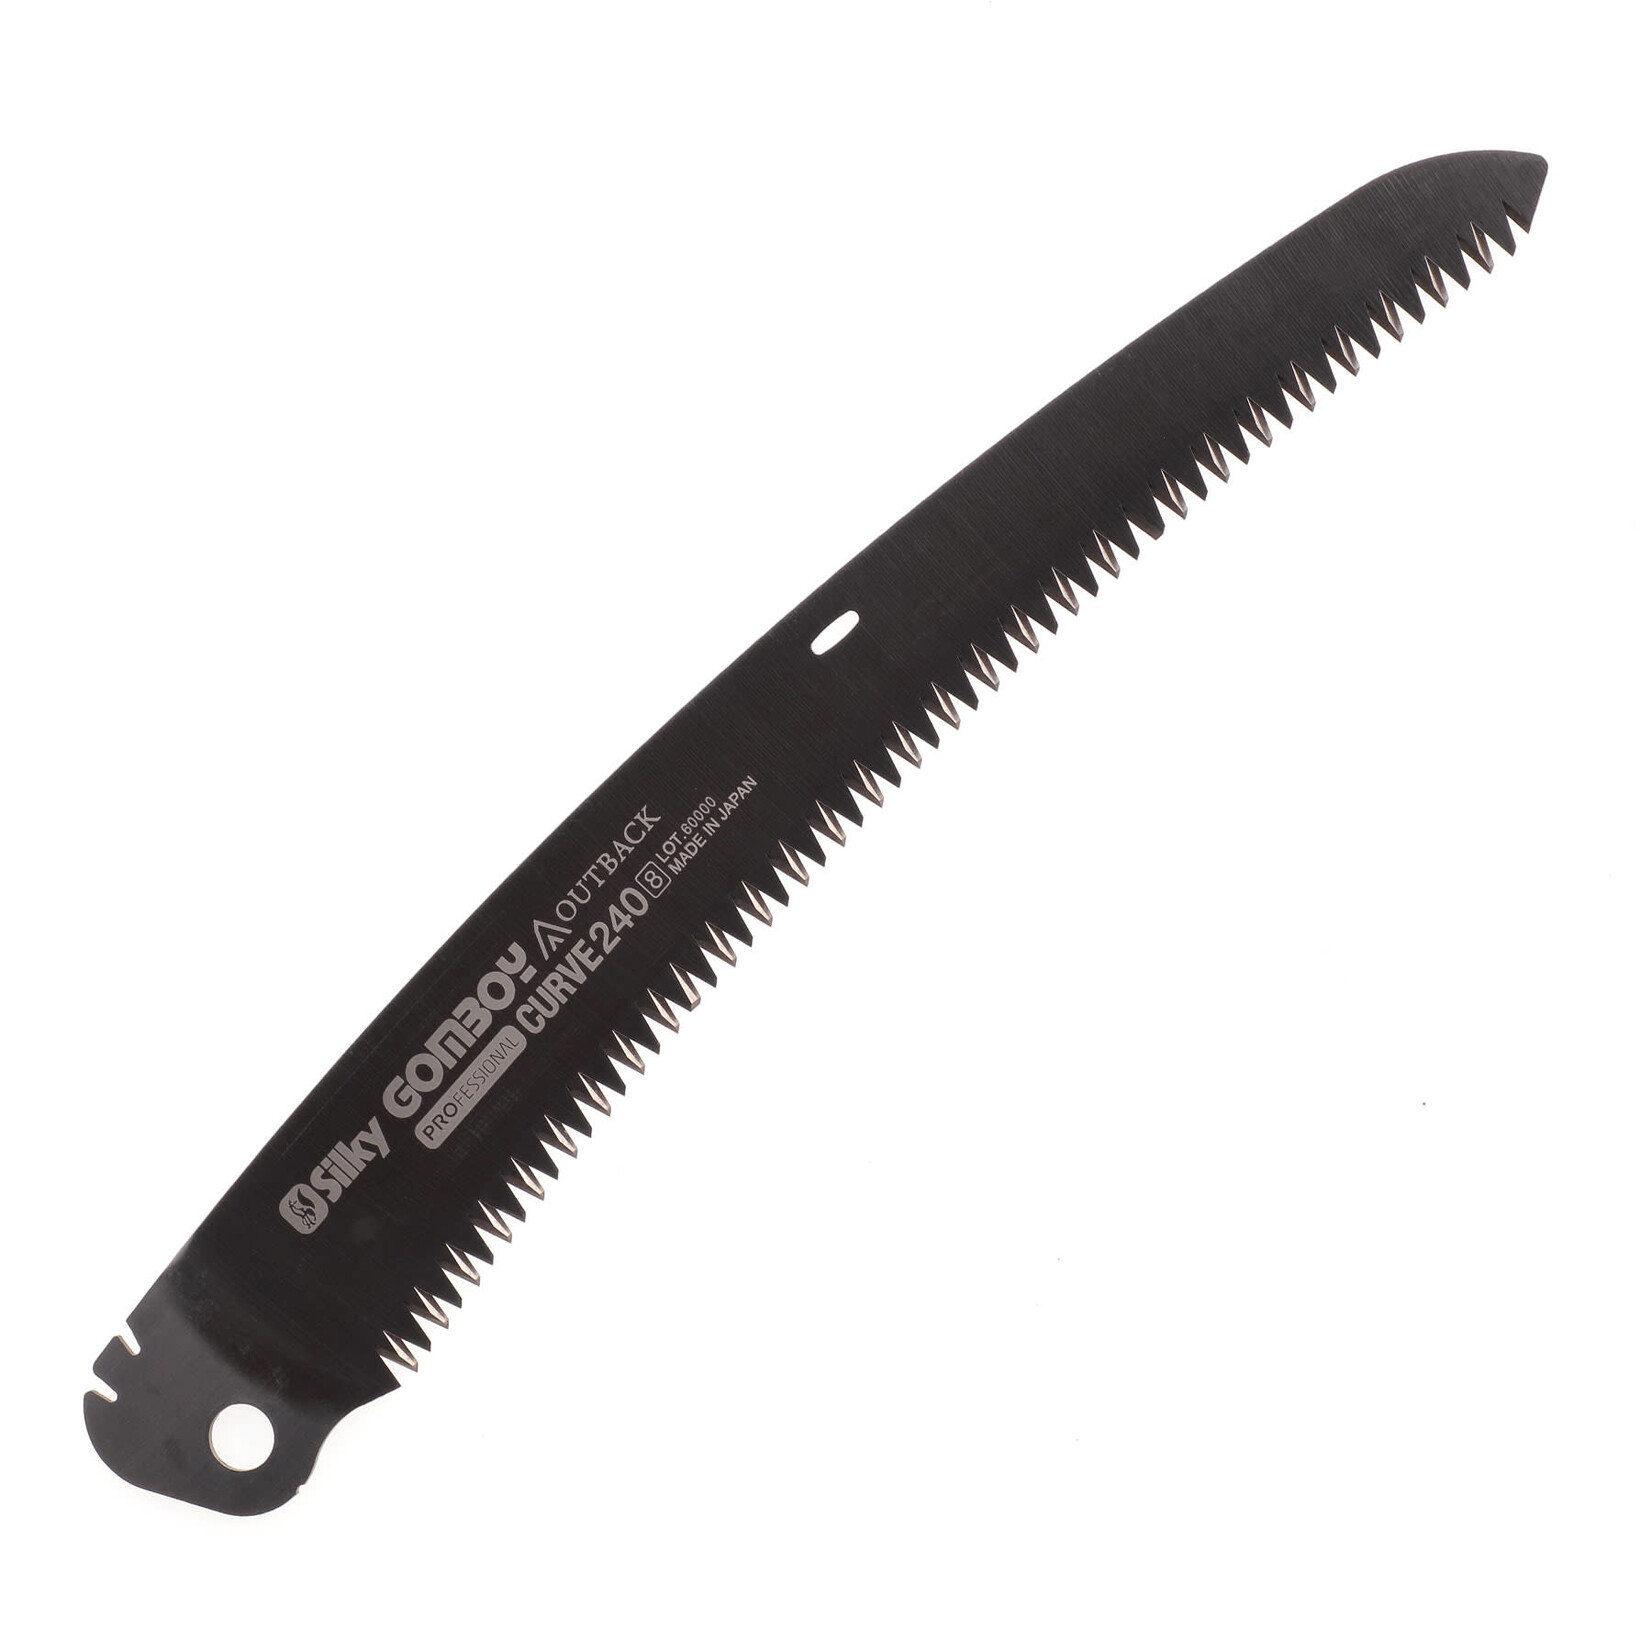 Silky Saws Gomboy Curve Professional 240mm, Outback Edition